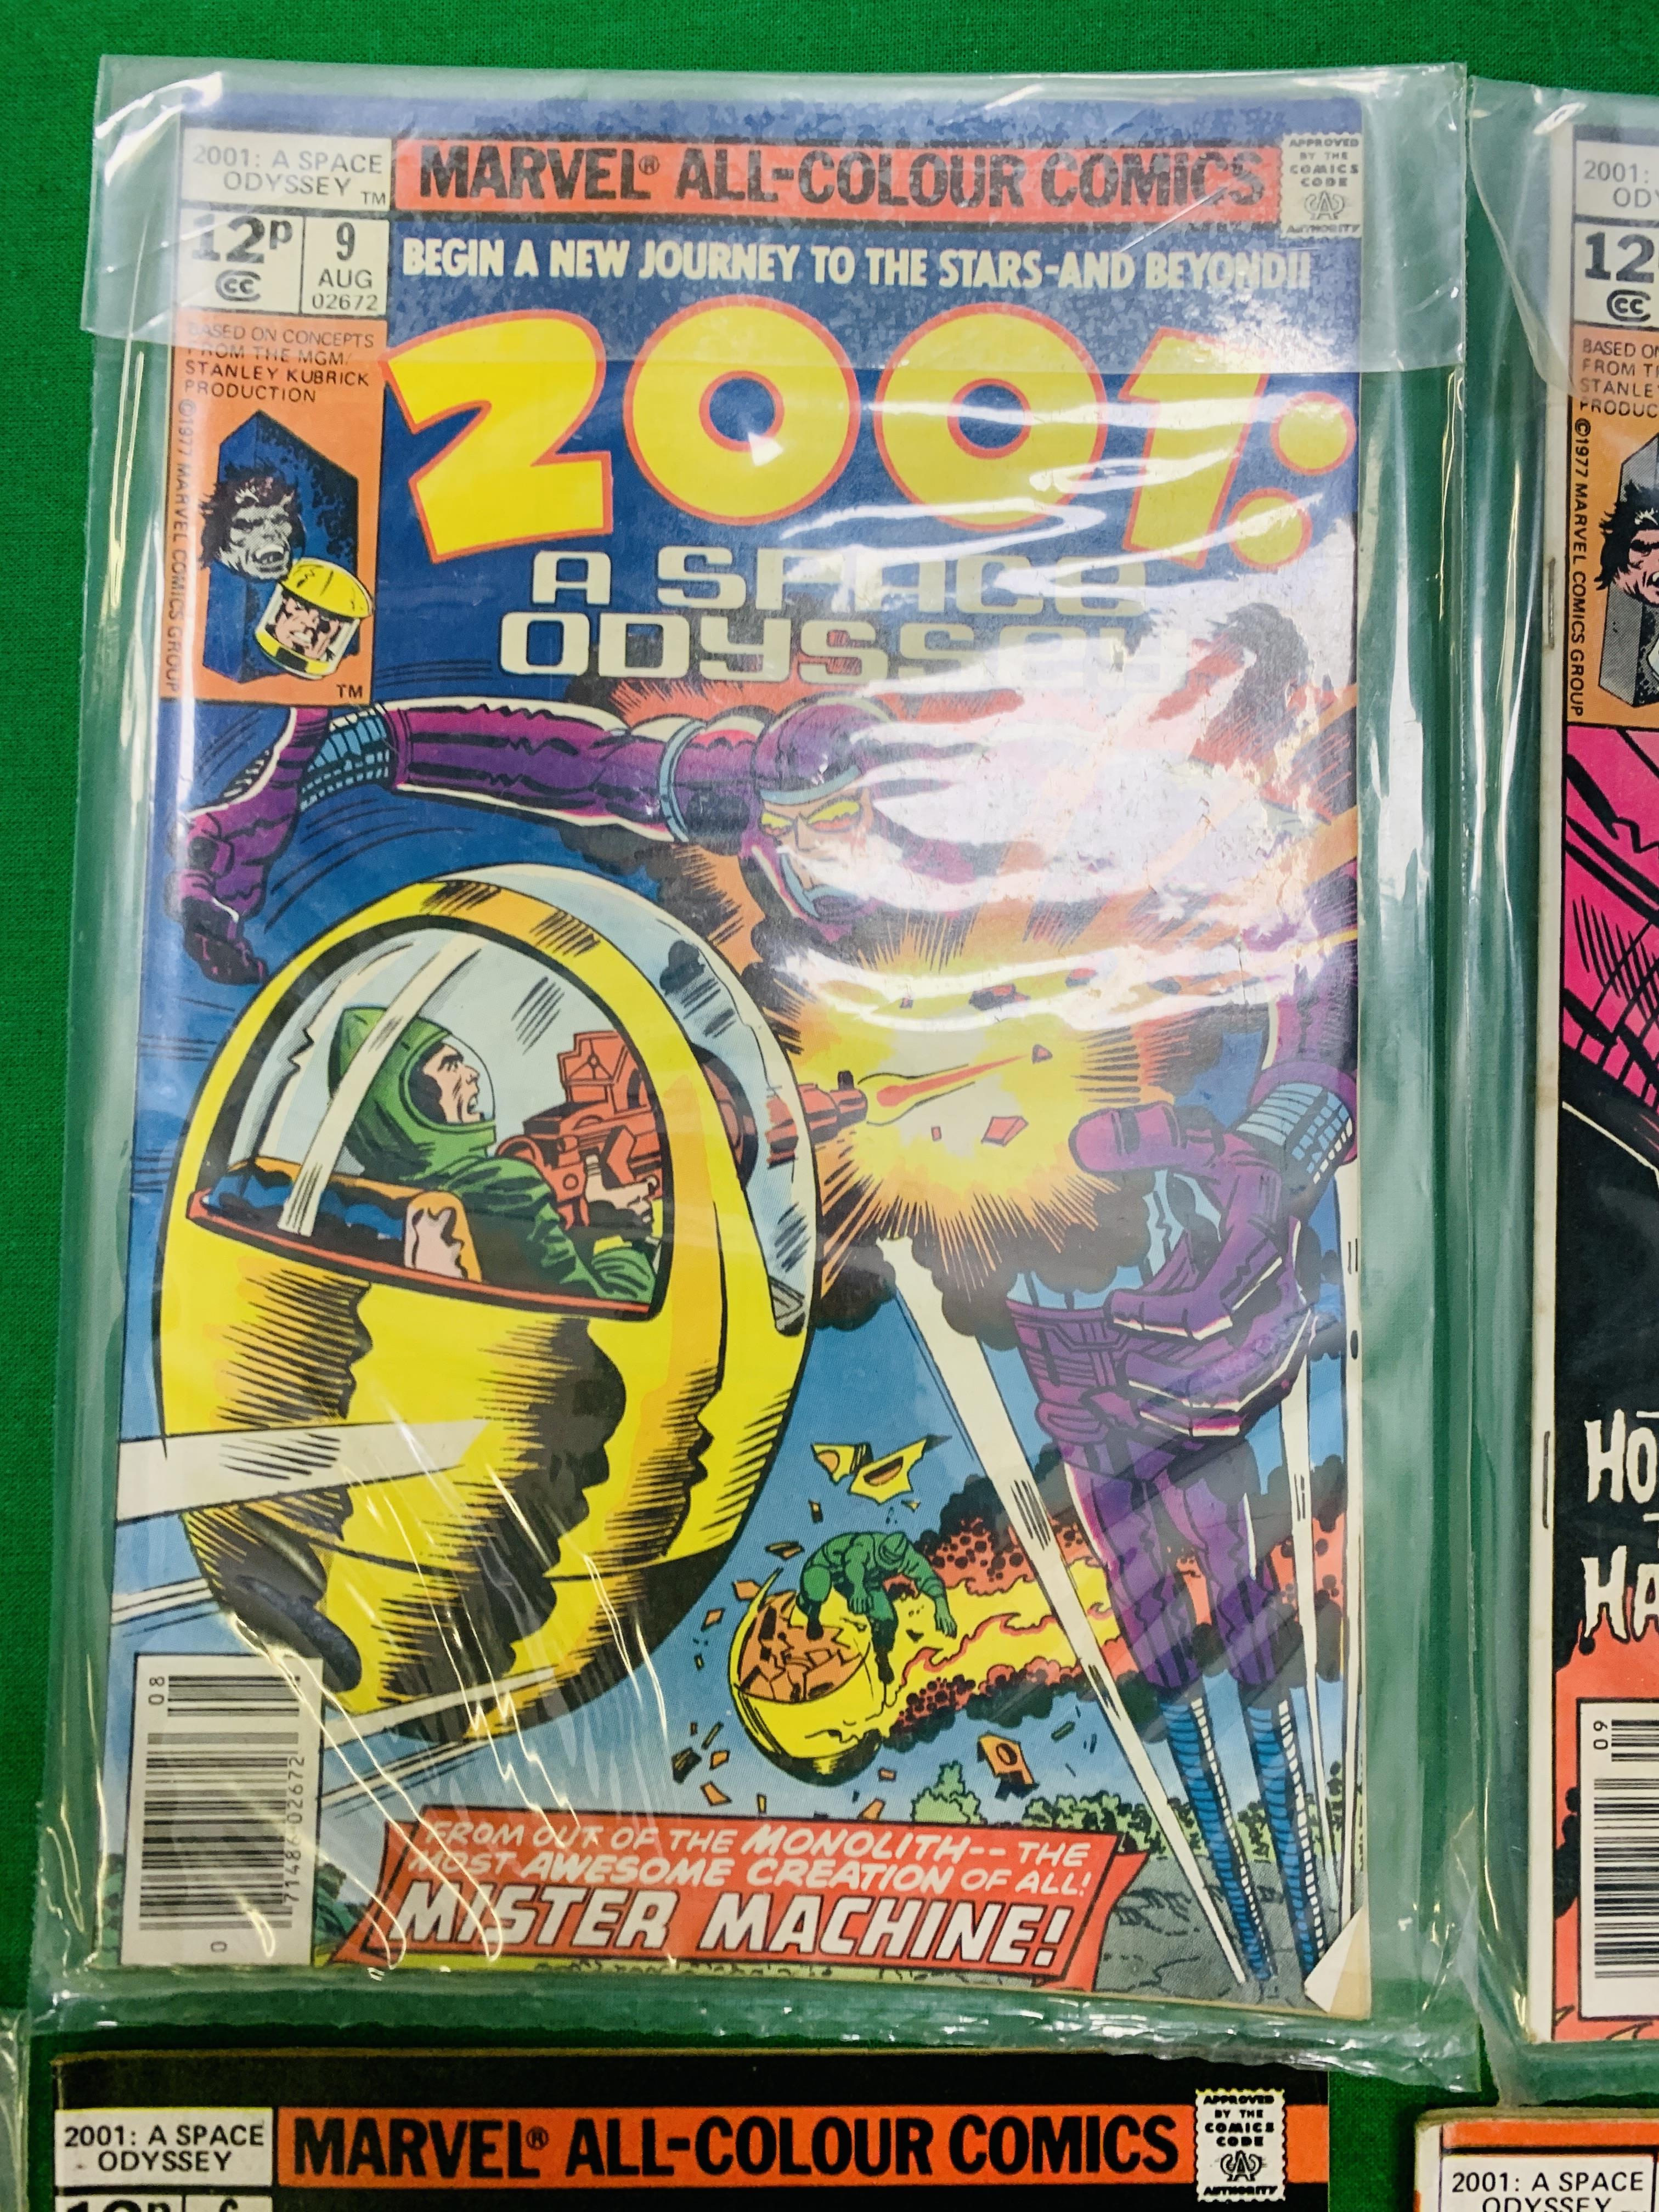 MARVEL COMICS 2001: A SPACE ODYSSEY NO. 1 - 10 FROM 1976, FIRST APPEARANCE NO. 8. MACHINE MAN X-51. - Image 10 of 11